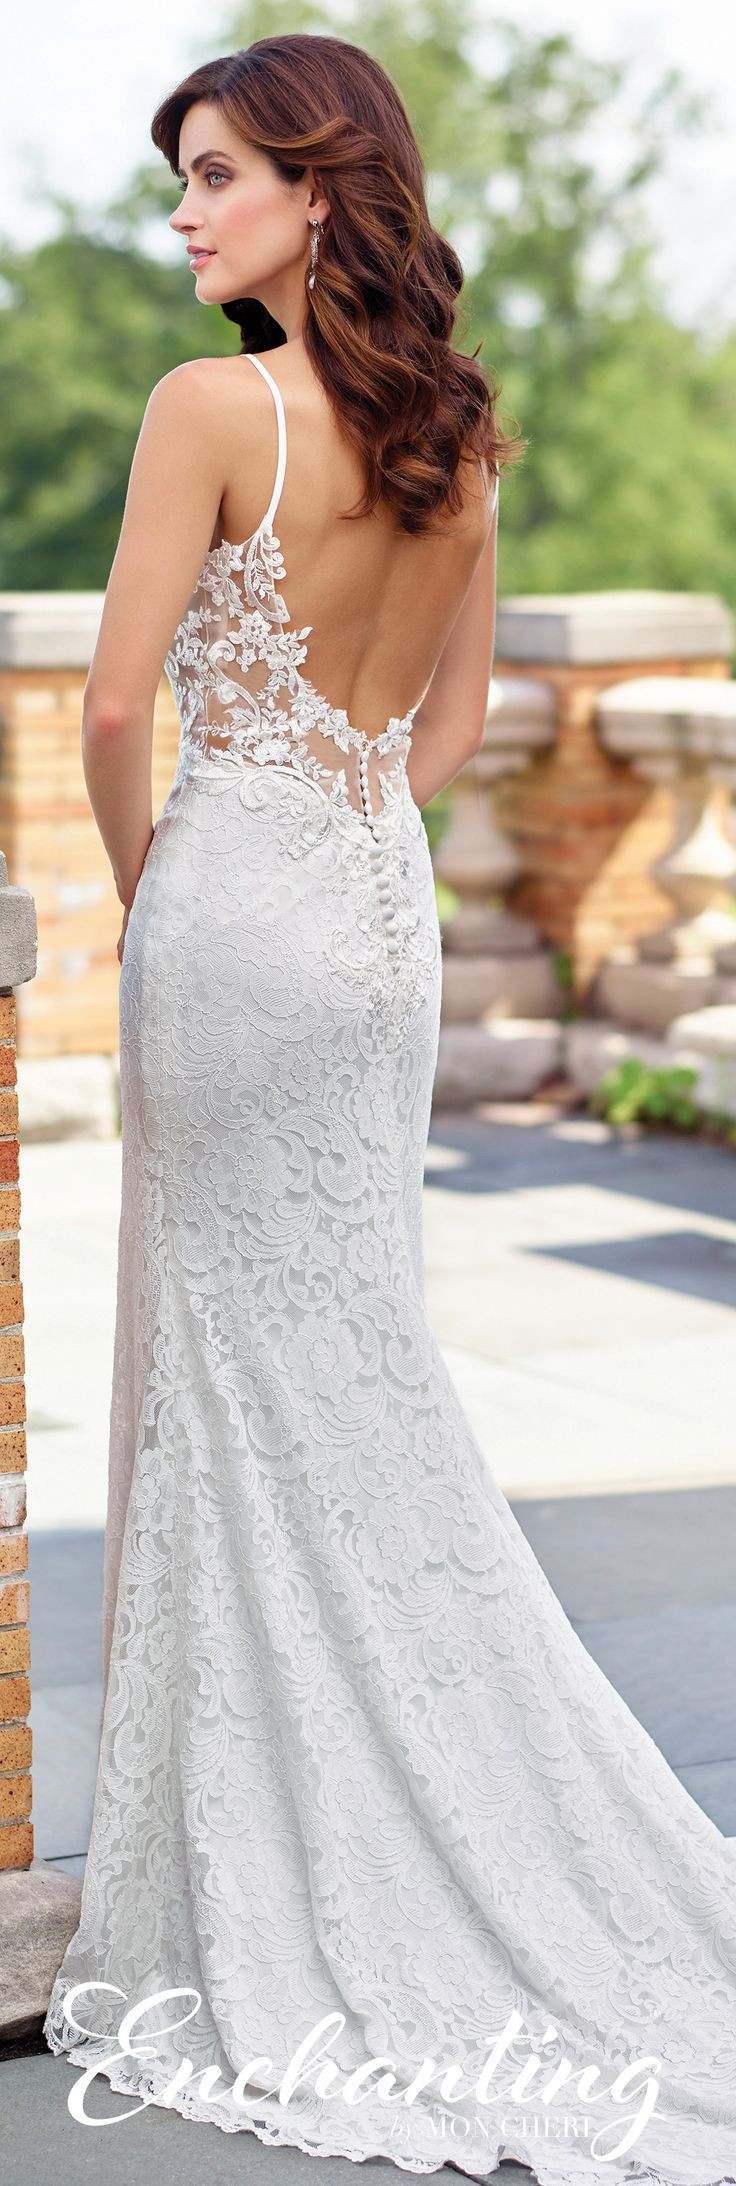 Lace Wedding Dress Pinterest
 Best 25 Fitted Lace Wedding Dress Ideas Pinterest